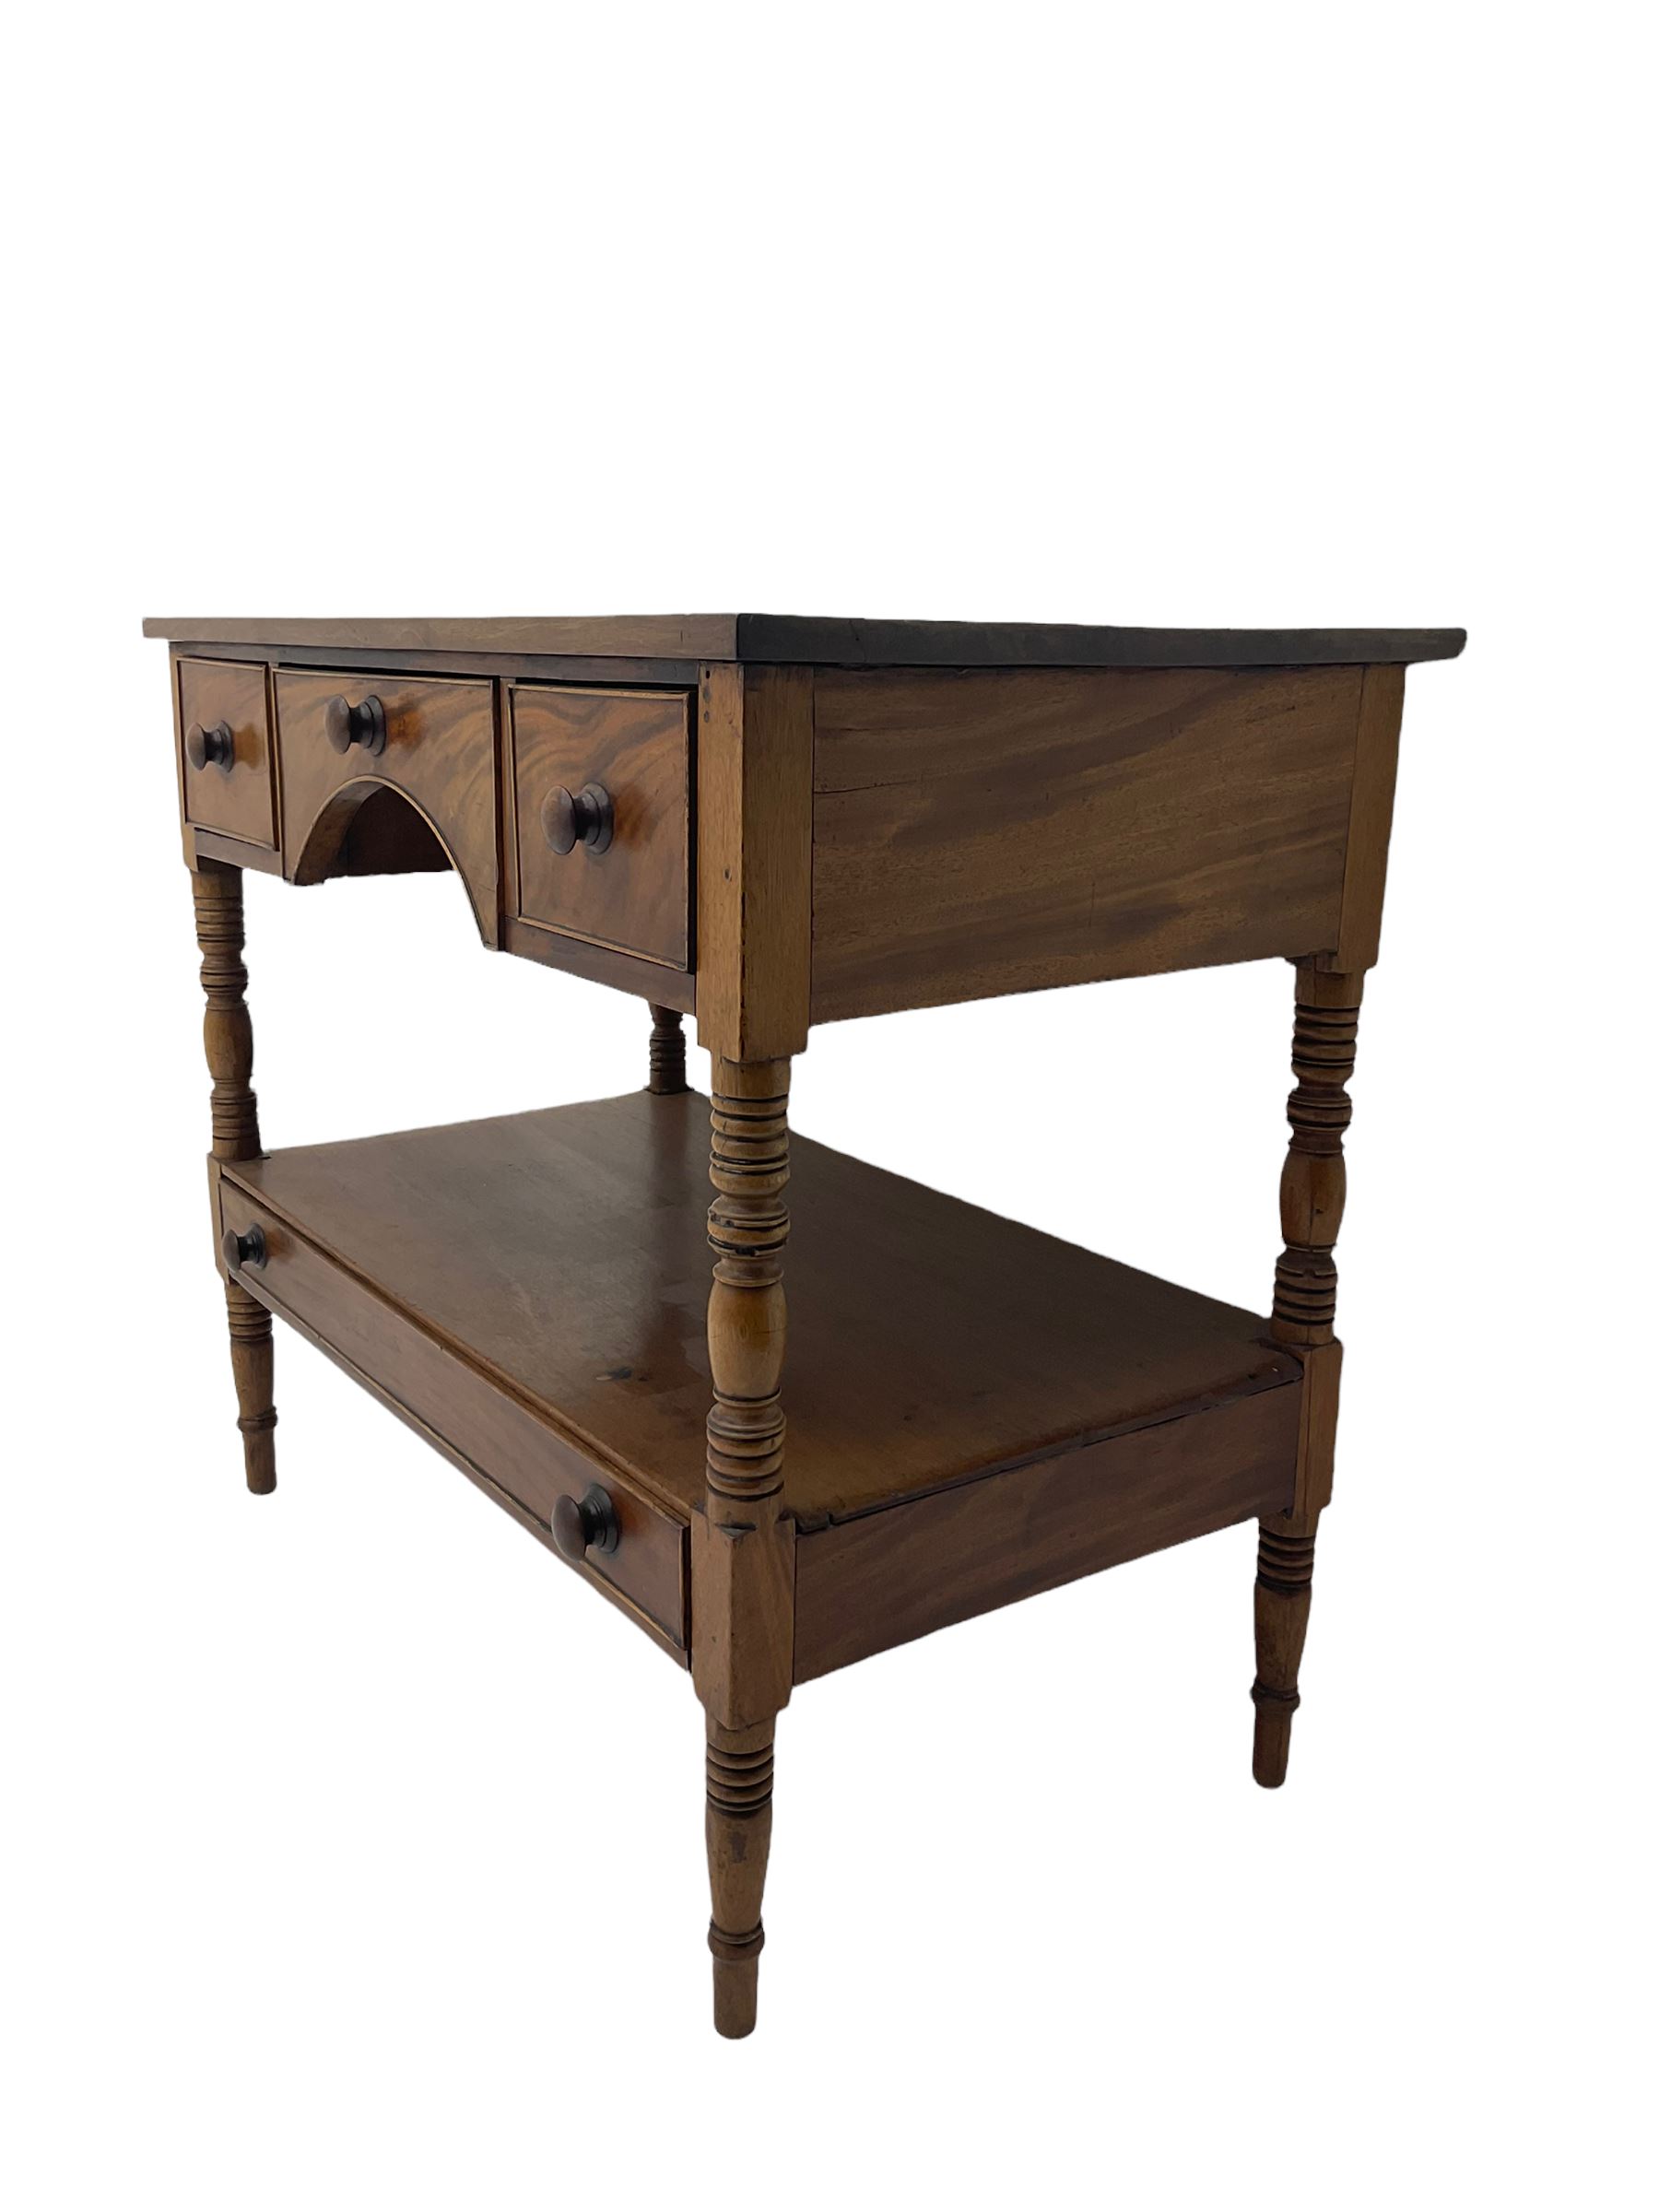 Early 19th century mahogany two tier washstand - Image 4 of 8